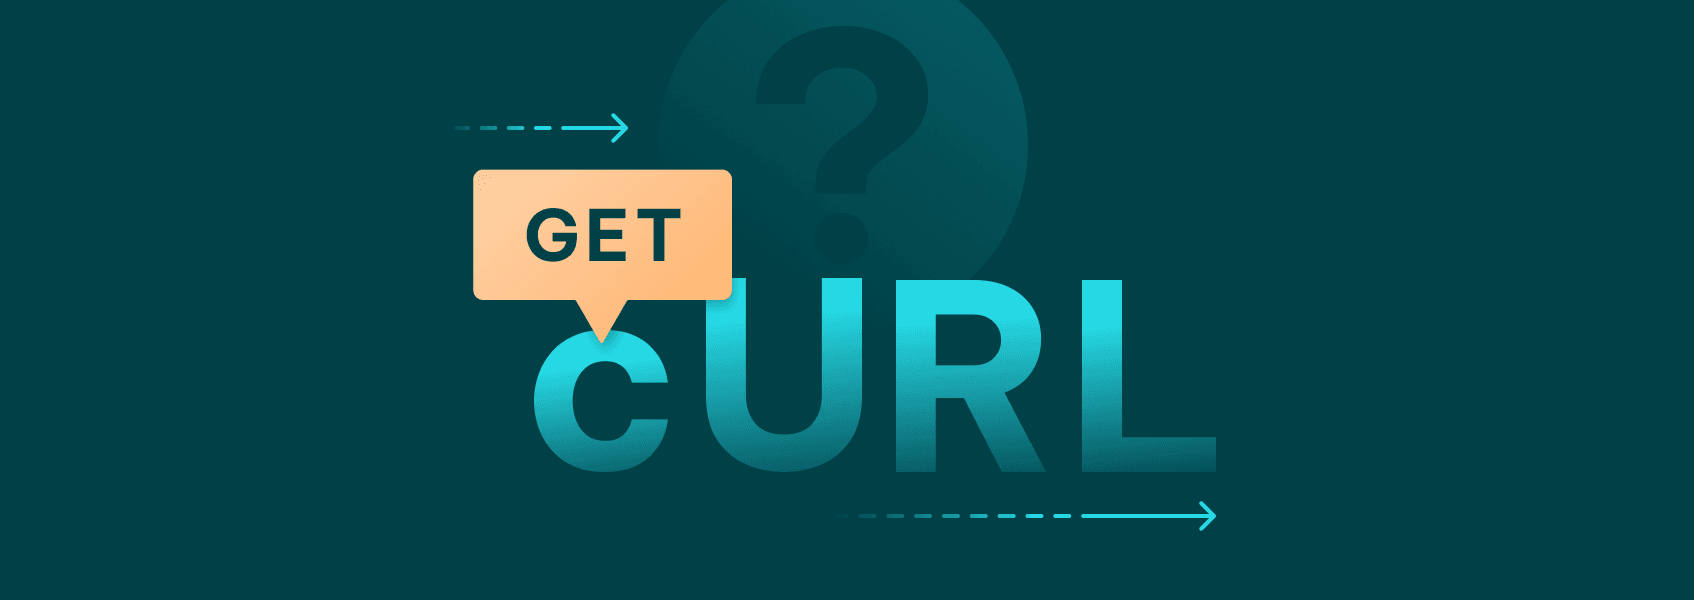 How to Send a cURL Get Request